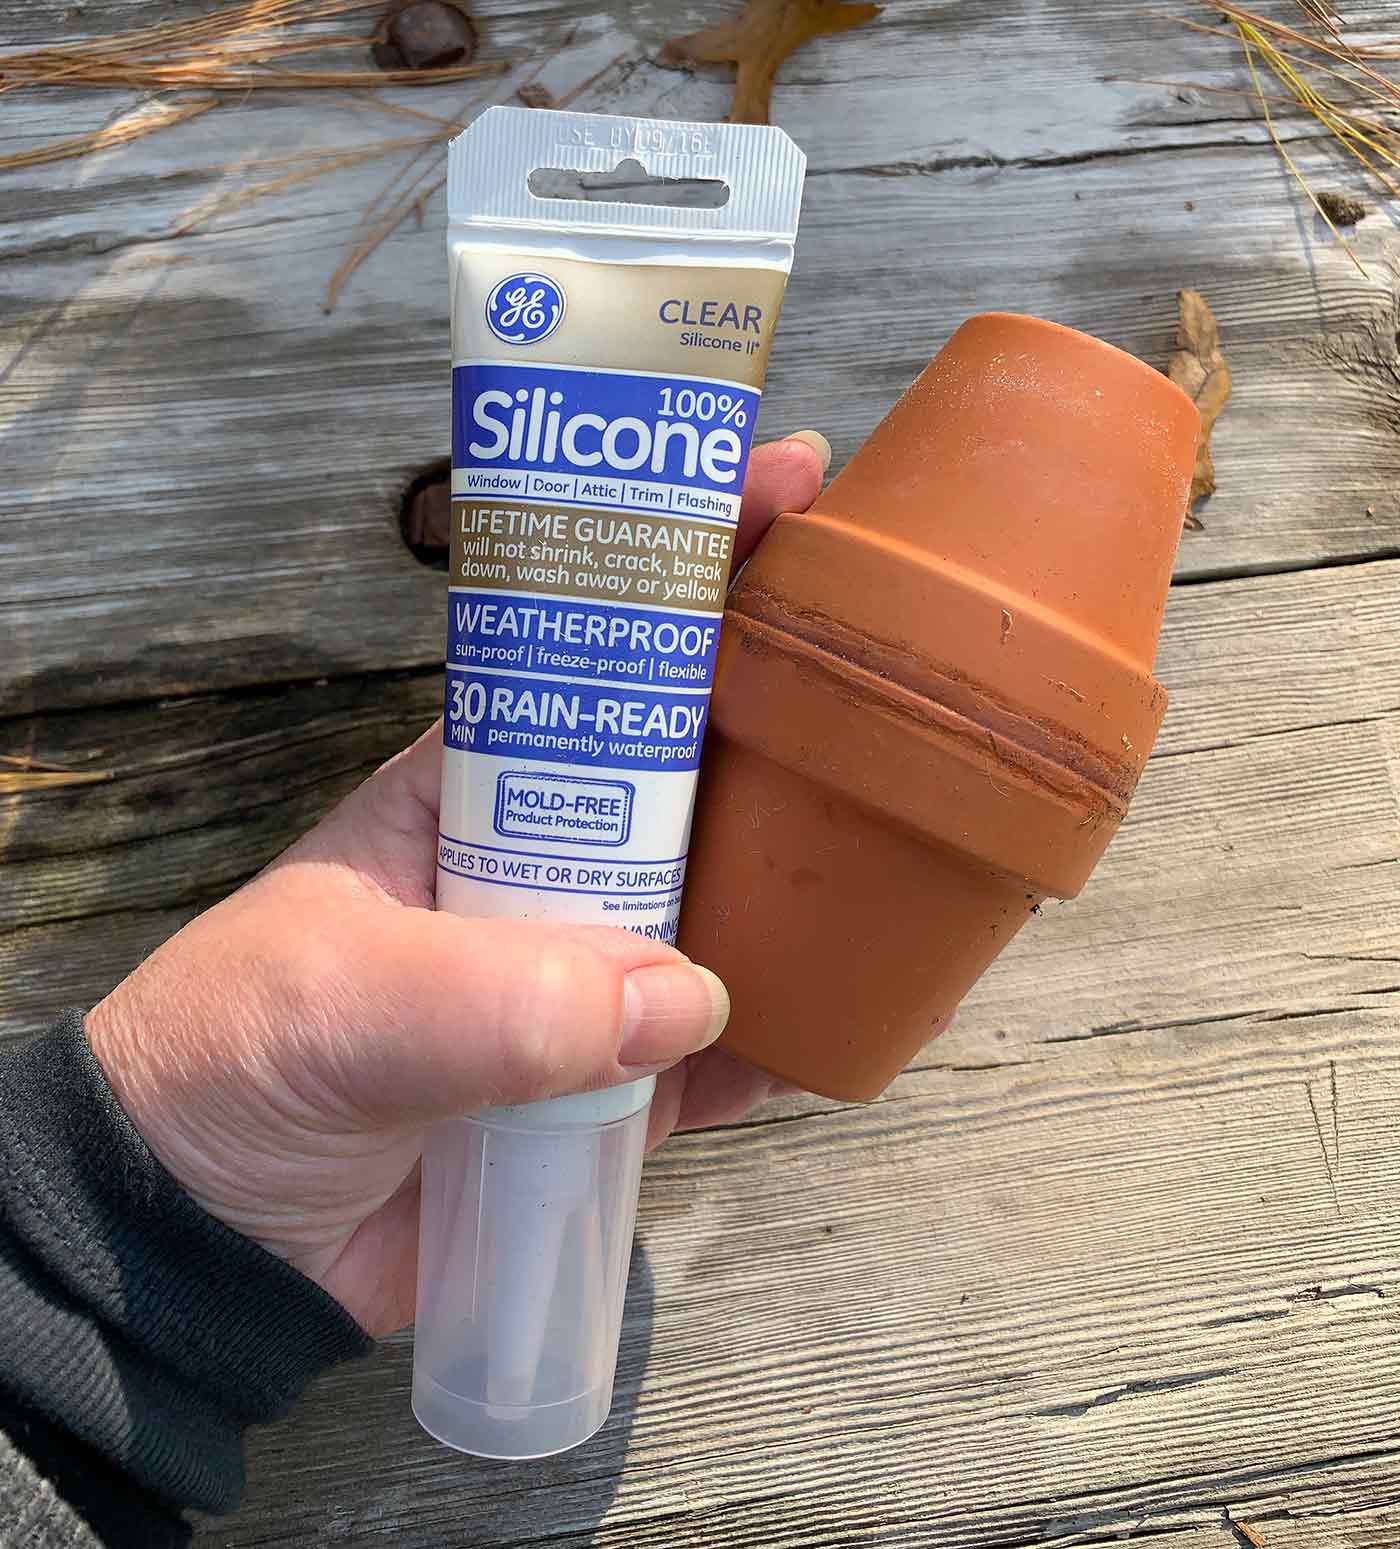 A tube of waterproof silicone used to glue terracotta pots together to make an olla.